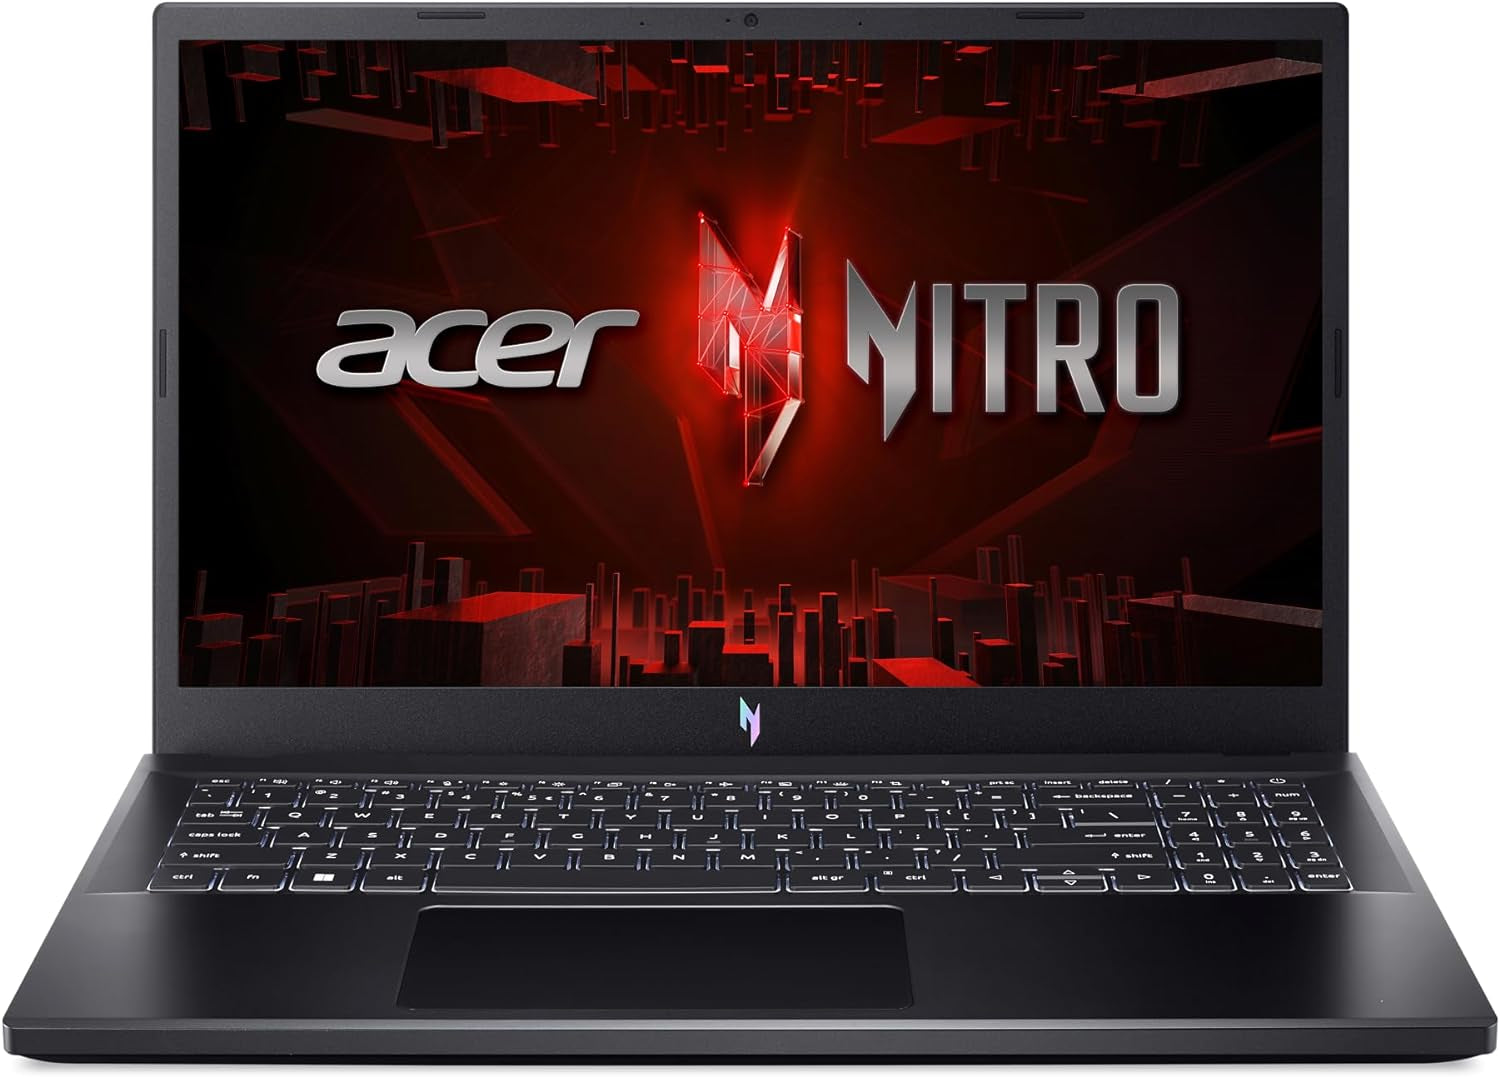 Professional title: "ANV15-51-73B9 Gaming Laptop with Intel Core i7-13620H Processor, NVIDIA GeForce RTX 4050 GPU, 15.6" FHD IPS 144Hz Display, 16GB DDR5, 512GB Gen 4 SSD, Wifi 6, and Backlit Keyboard"